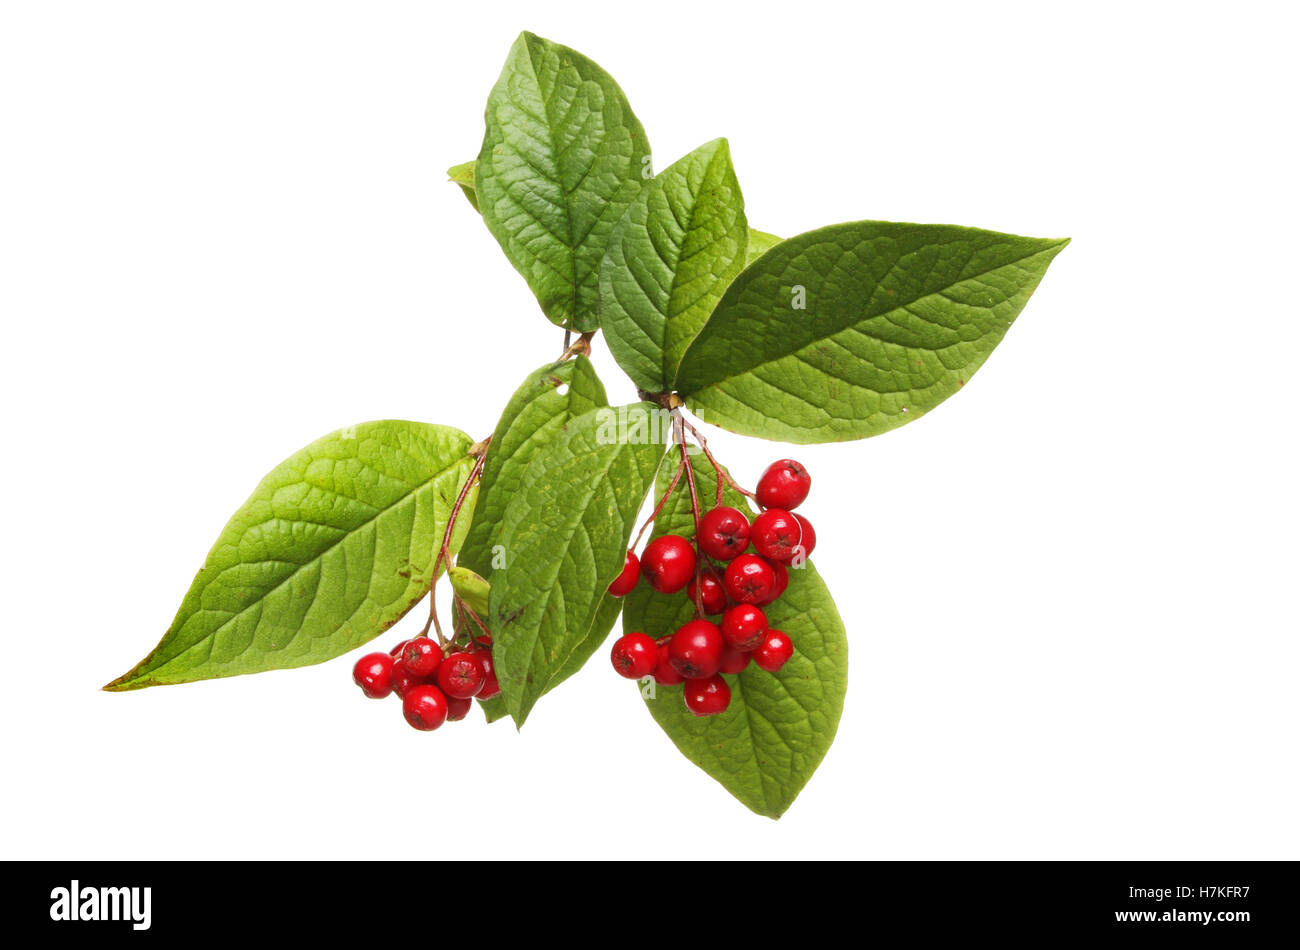 Cotoneaster leaves and red berries isolated against white Stock Photo